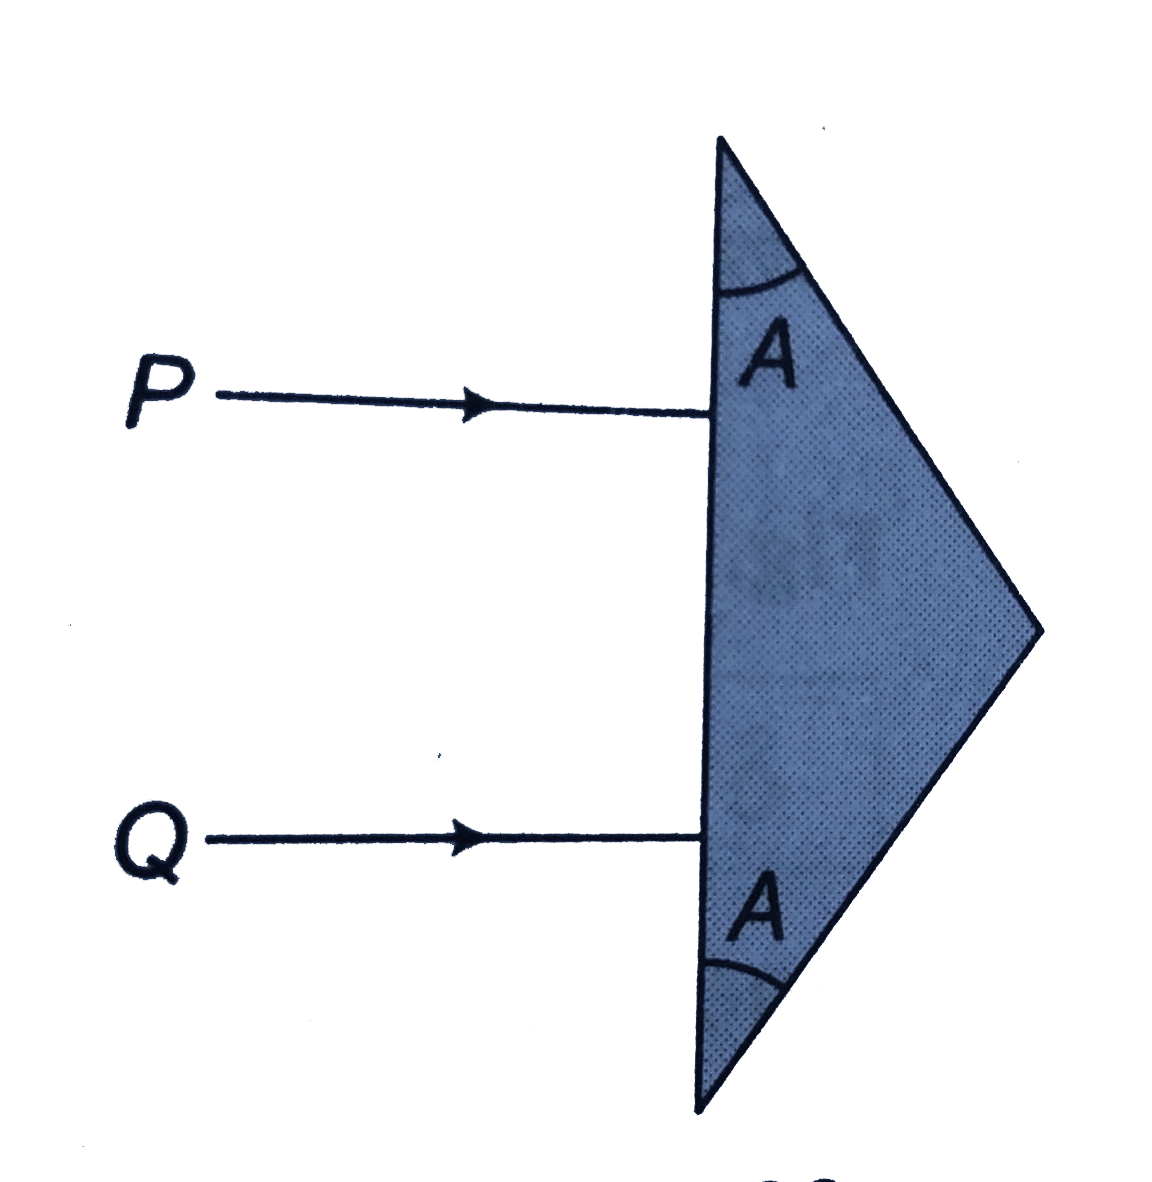 The prism shown in figure has a refractive index of 1.60 and the angles A are 30^@. Two light rays P and Q are parallel as they enter the prism. What is the angle between them after they emerge? [sin^-1(0.8)=53^@]